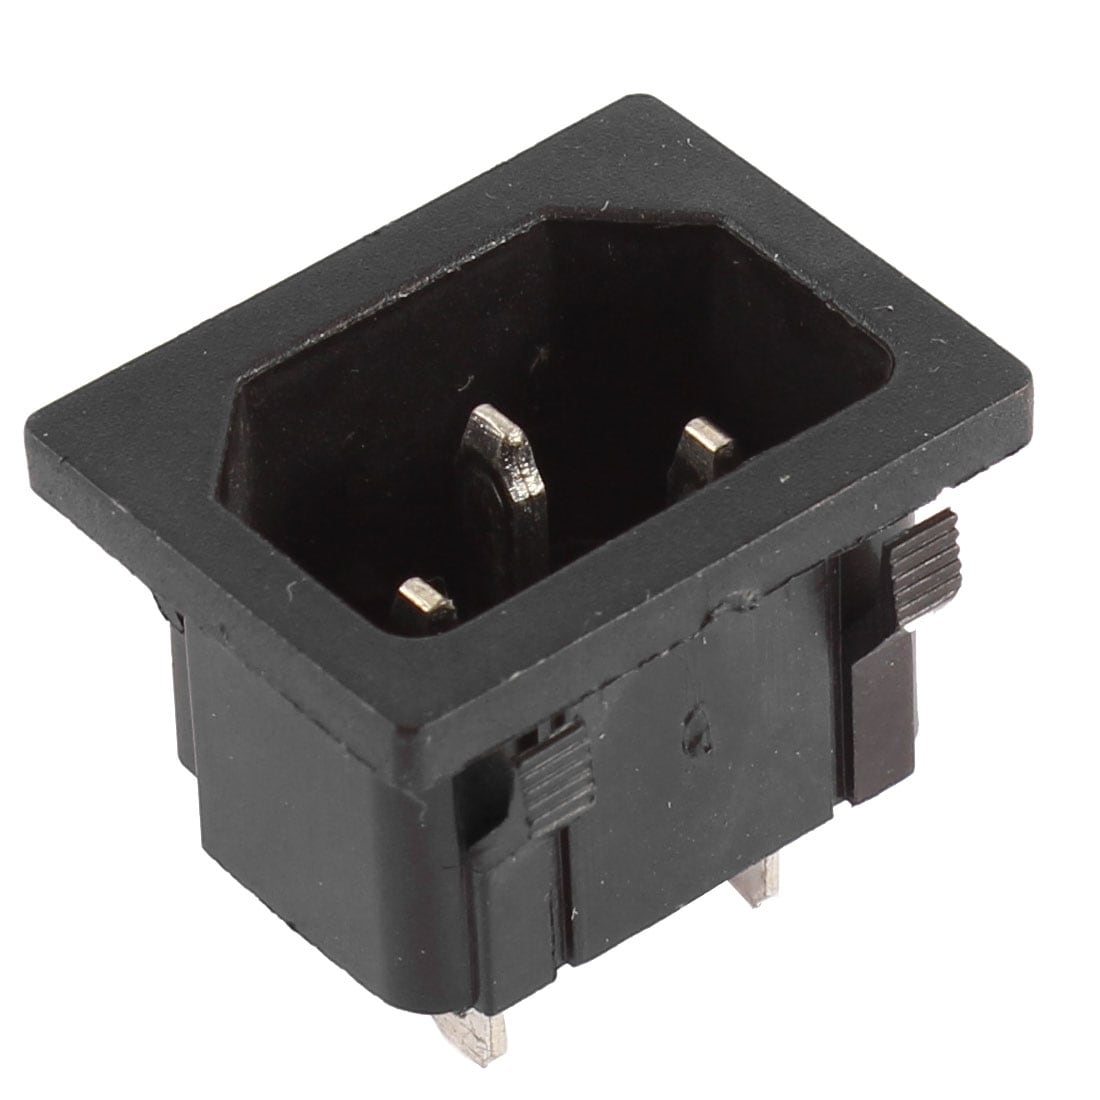 AC 250V 10A IEC320 C14 3P Snap in Inlet Power Plug Socket Connector Adapter - Black, Silver Tone -  Unique Bargains, a15071600ux0202